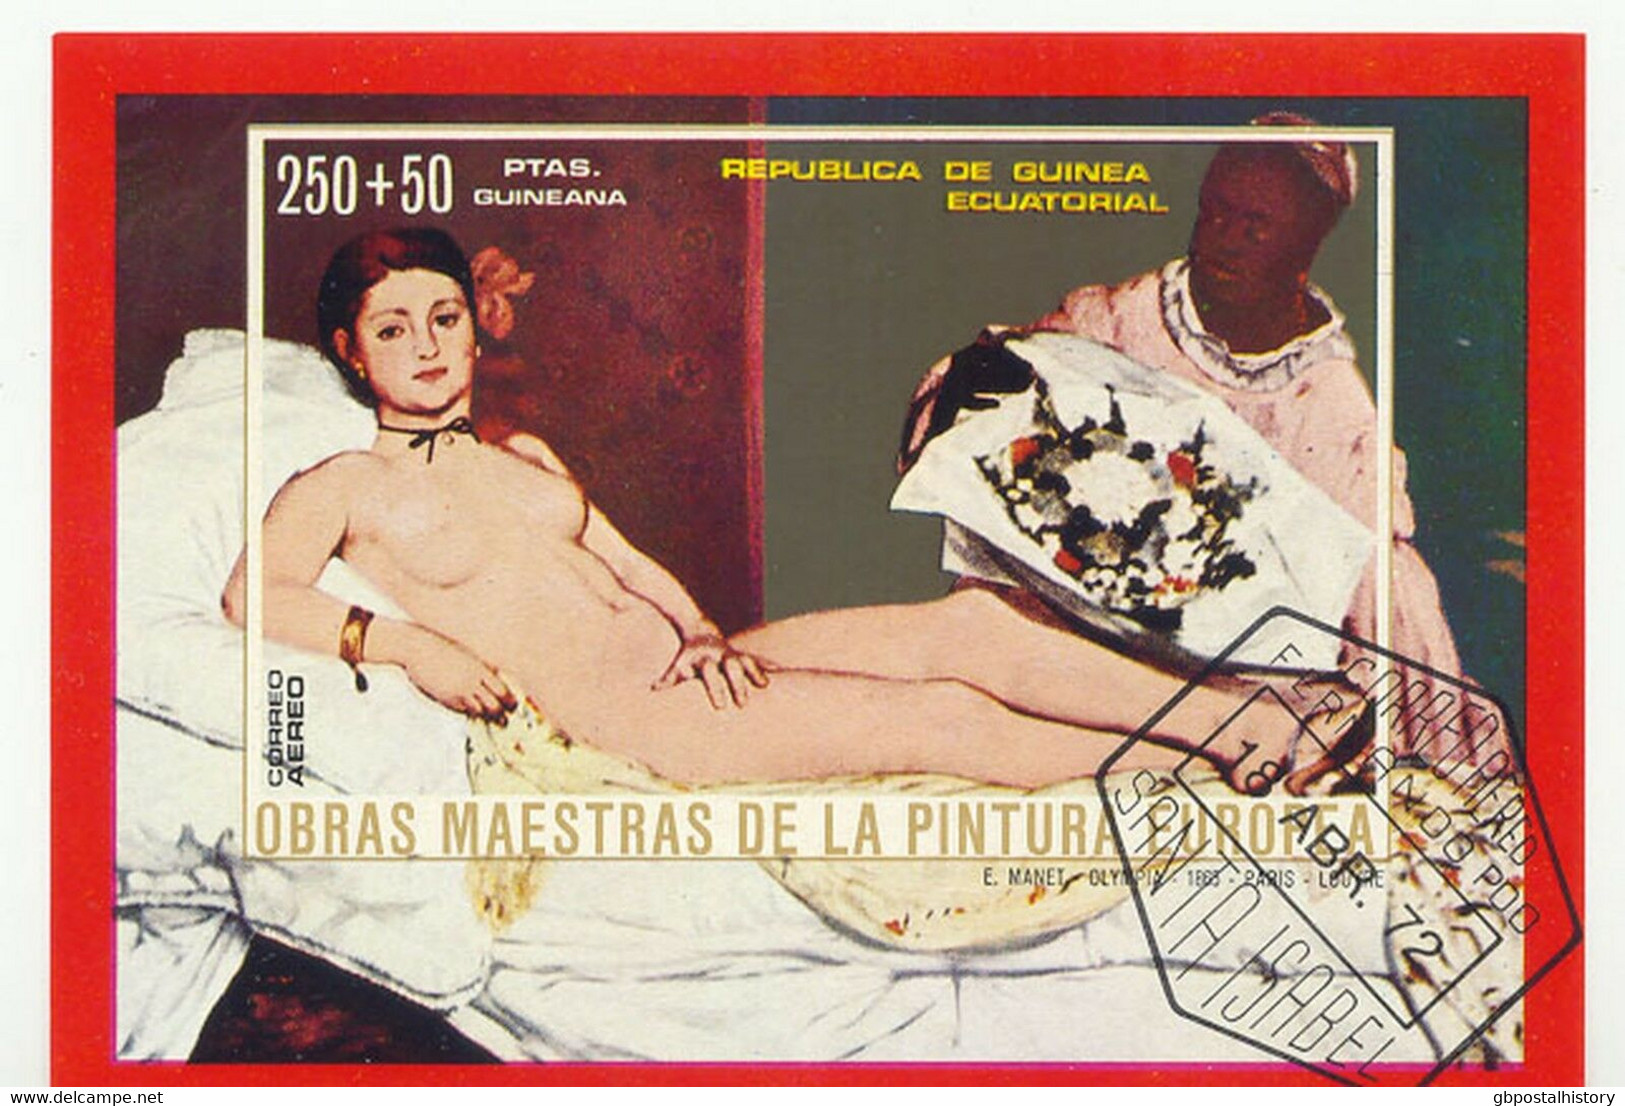 EQUATORIAL GUINEA 1972 Nude Painting By P. Manet 250+50 Ptas. IMPERFORATED Superb Used M/S ERROR/VARIETY Kissed Backside - Guinée Equatoriale